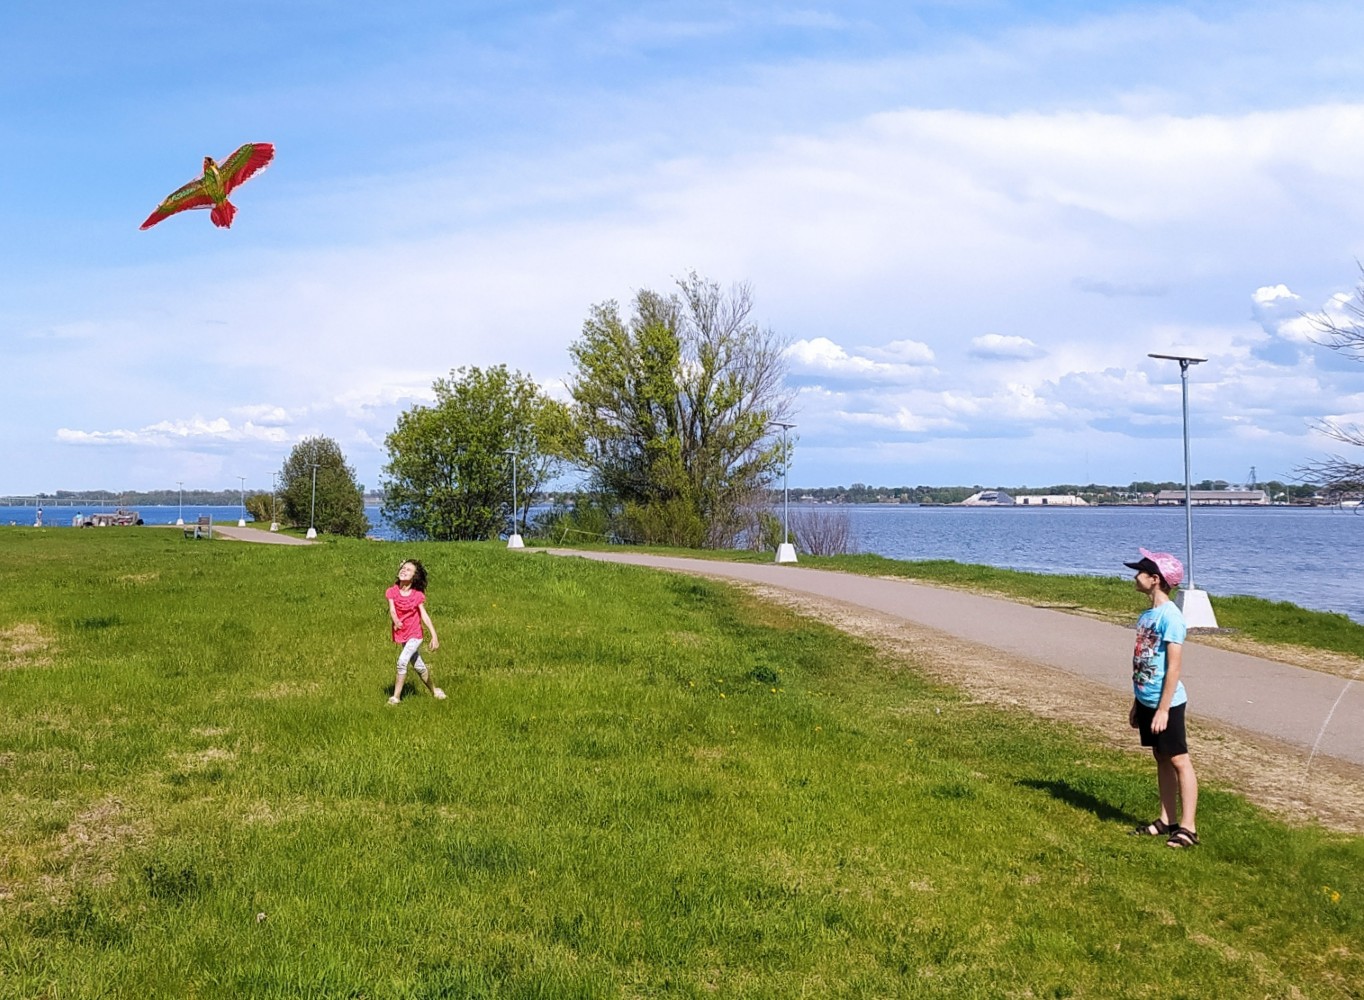 Maryna's children Timur and Liana by Prescott's waterfront, looking at a kite in the sky